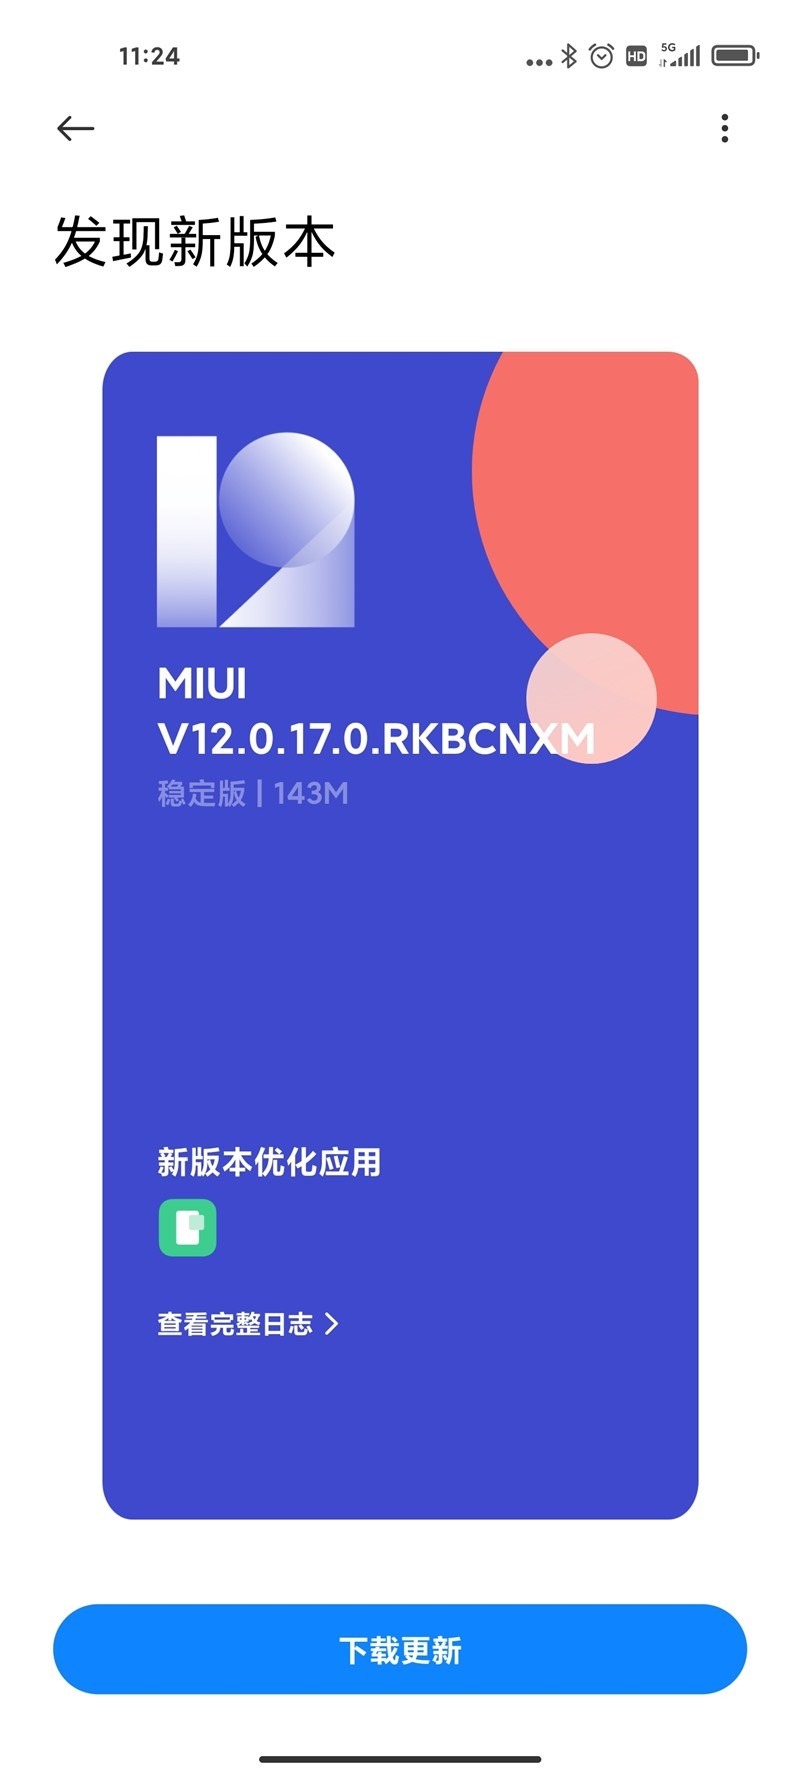 latest stable update for Mi 11 